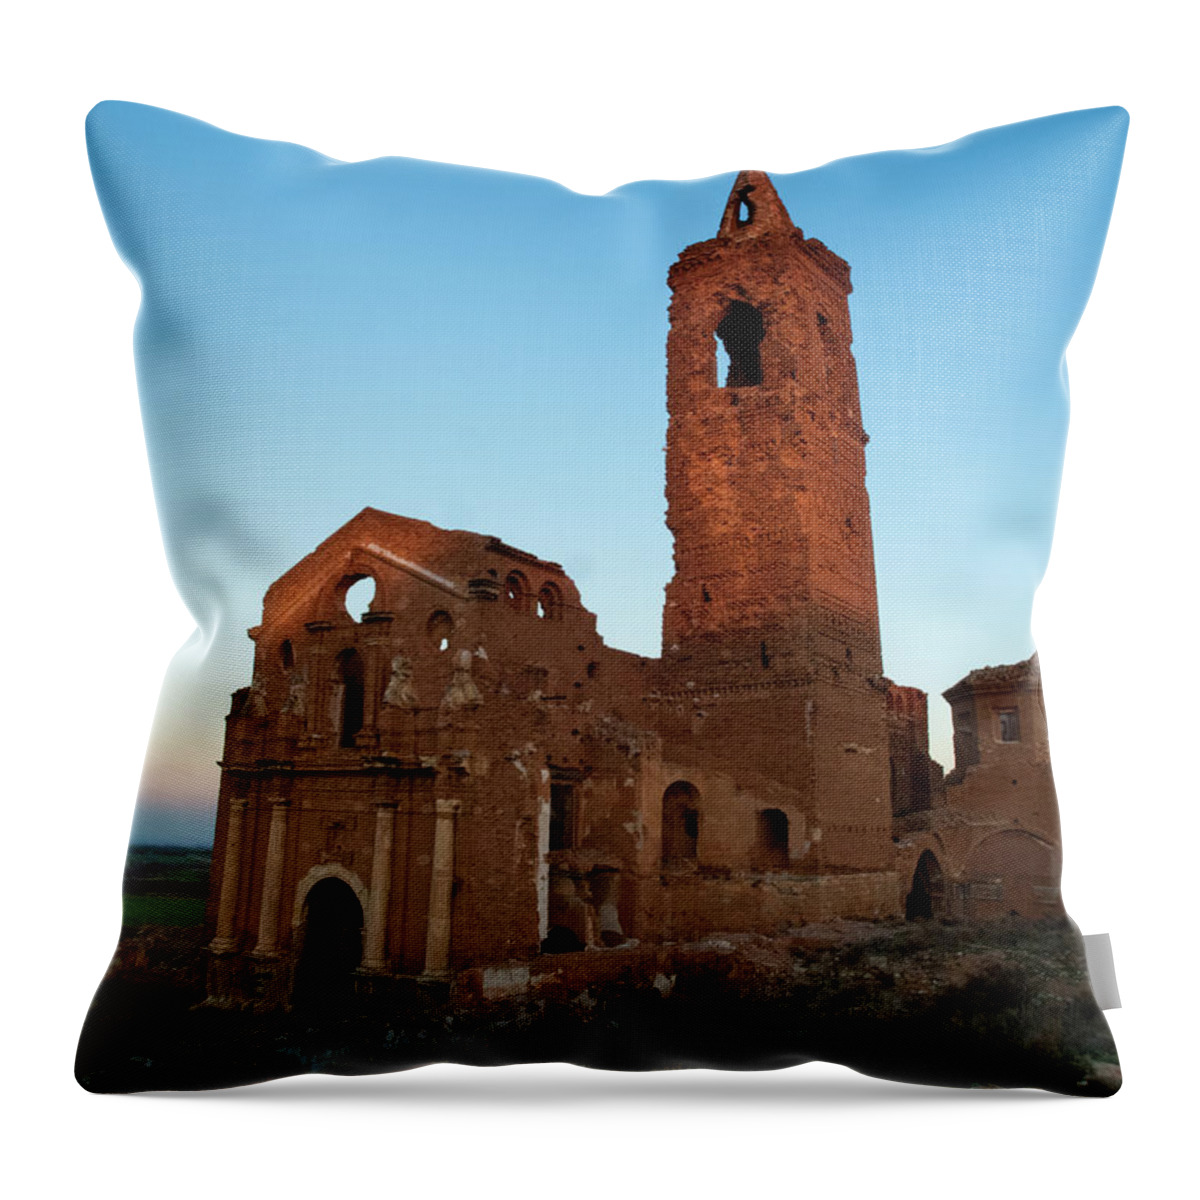 Grass Throw Pillow featuring the photograph Abandoned Catholic Church At Sunset by By Paco Calvino (barcelona, Spain)